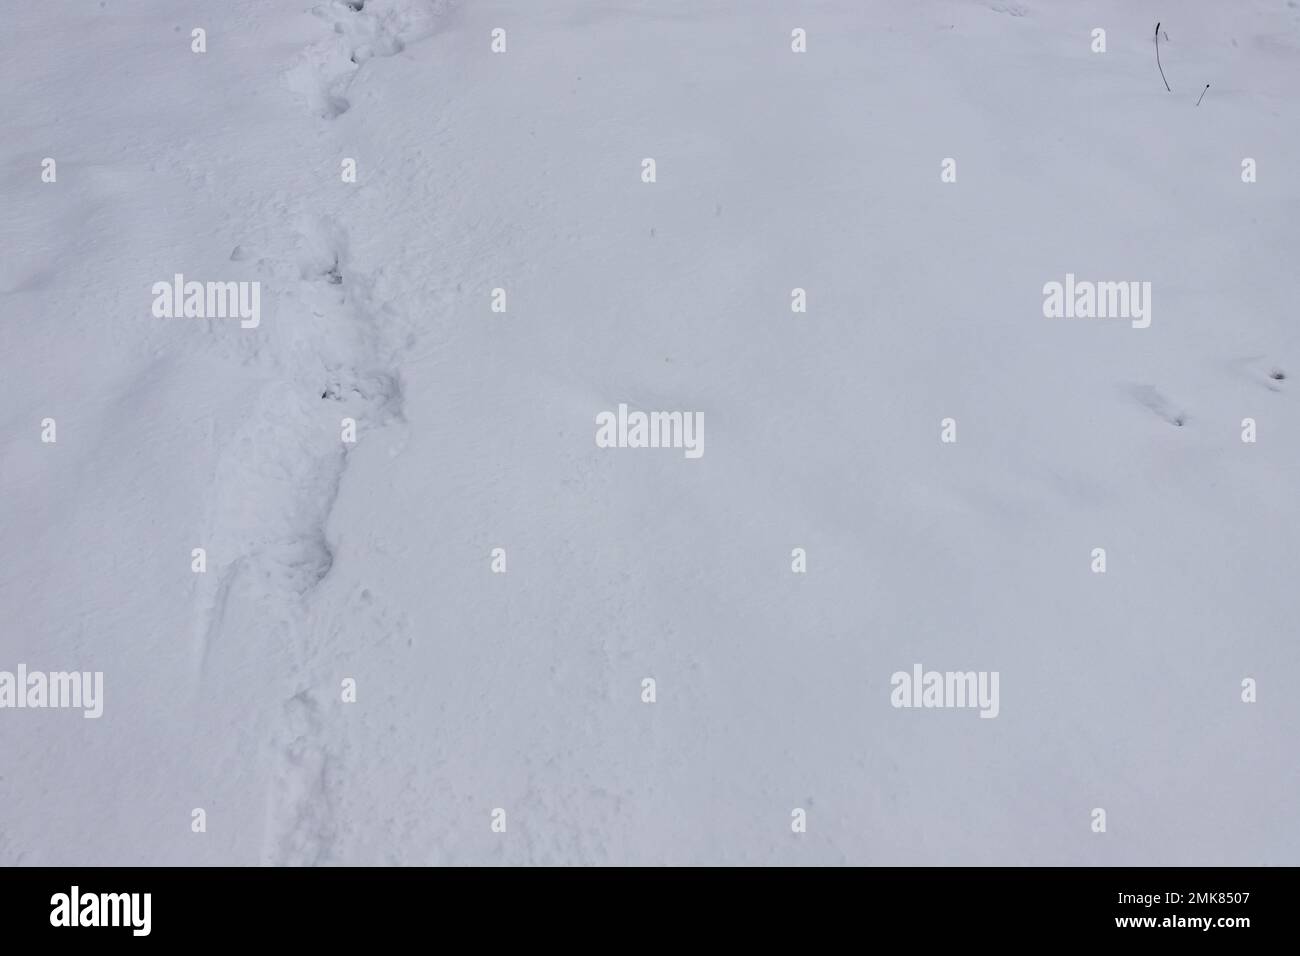 Top view of the footprint of shoes boots on fresh snow. The winter season. Stock Photo